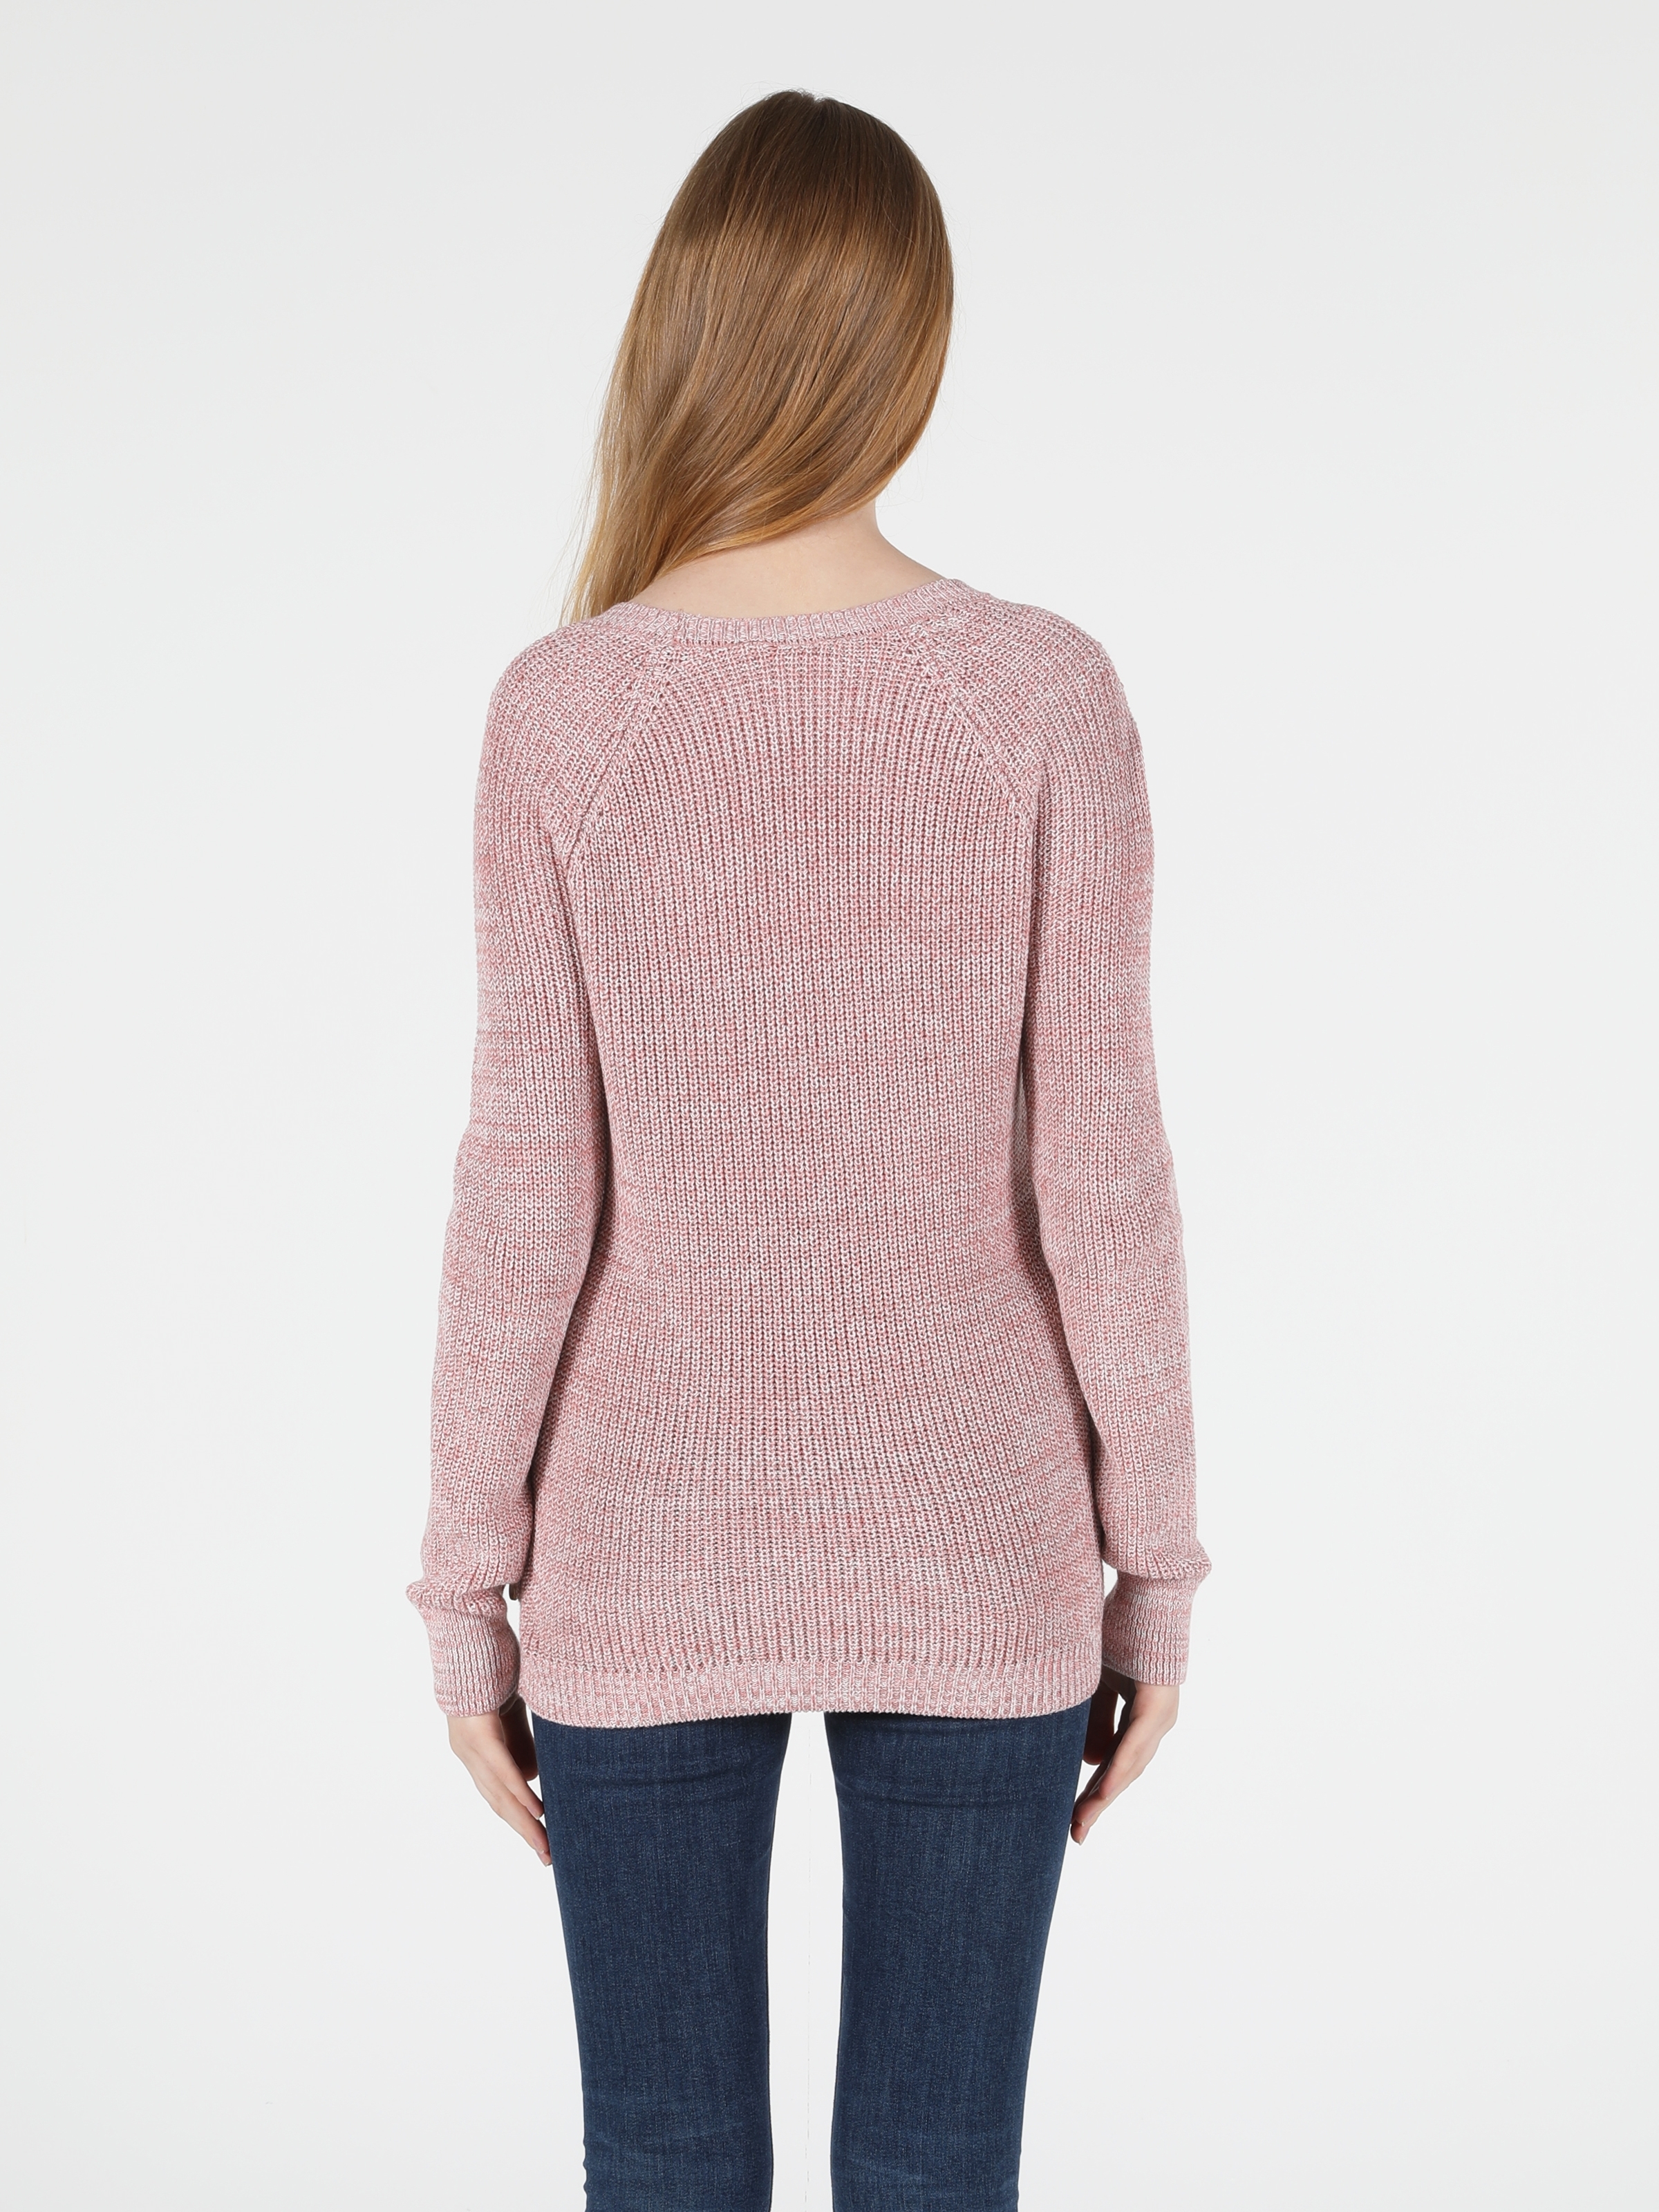 Colins Pınk Woman Sweaters. 2